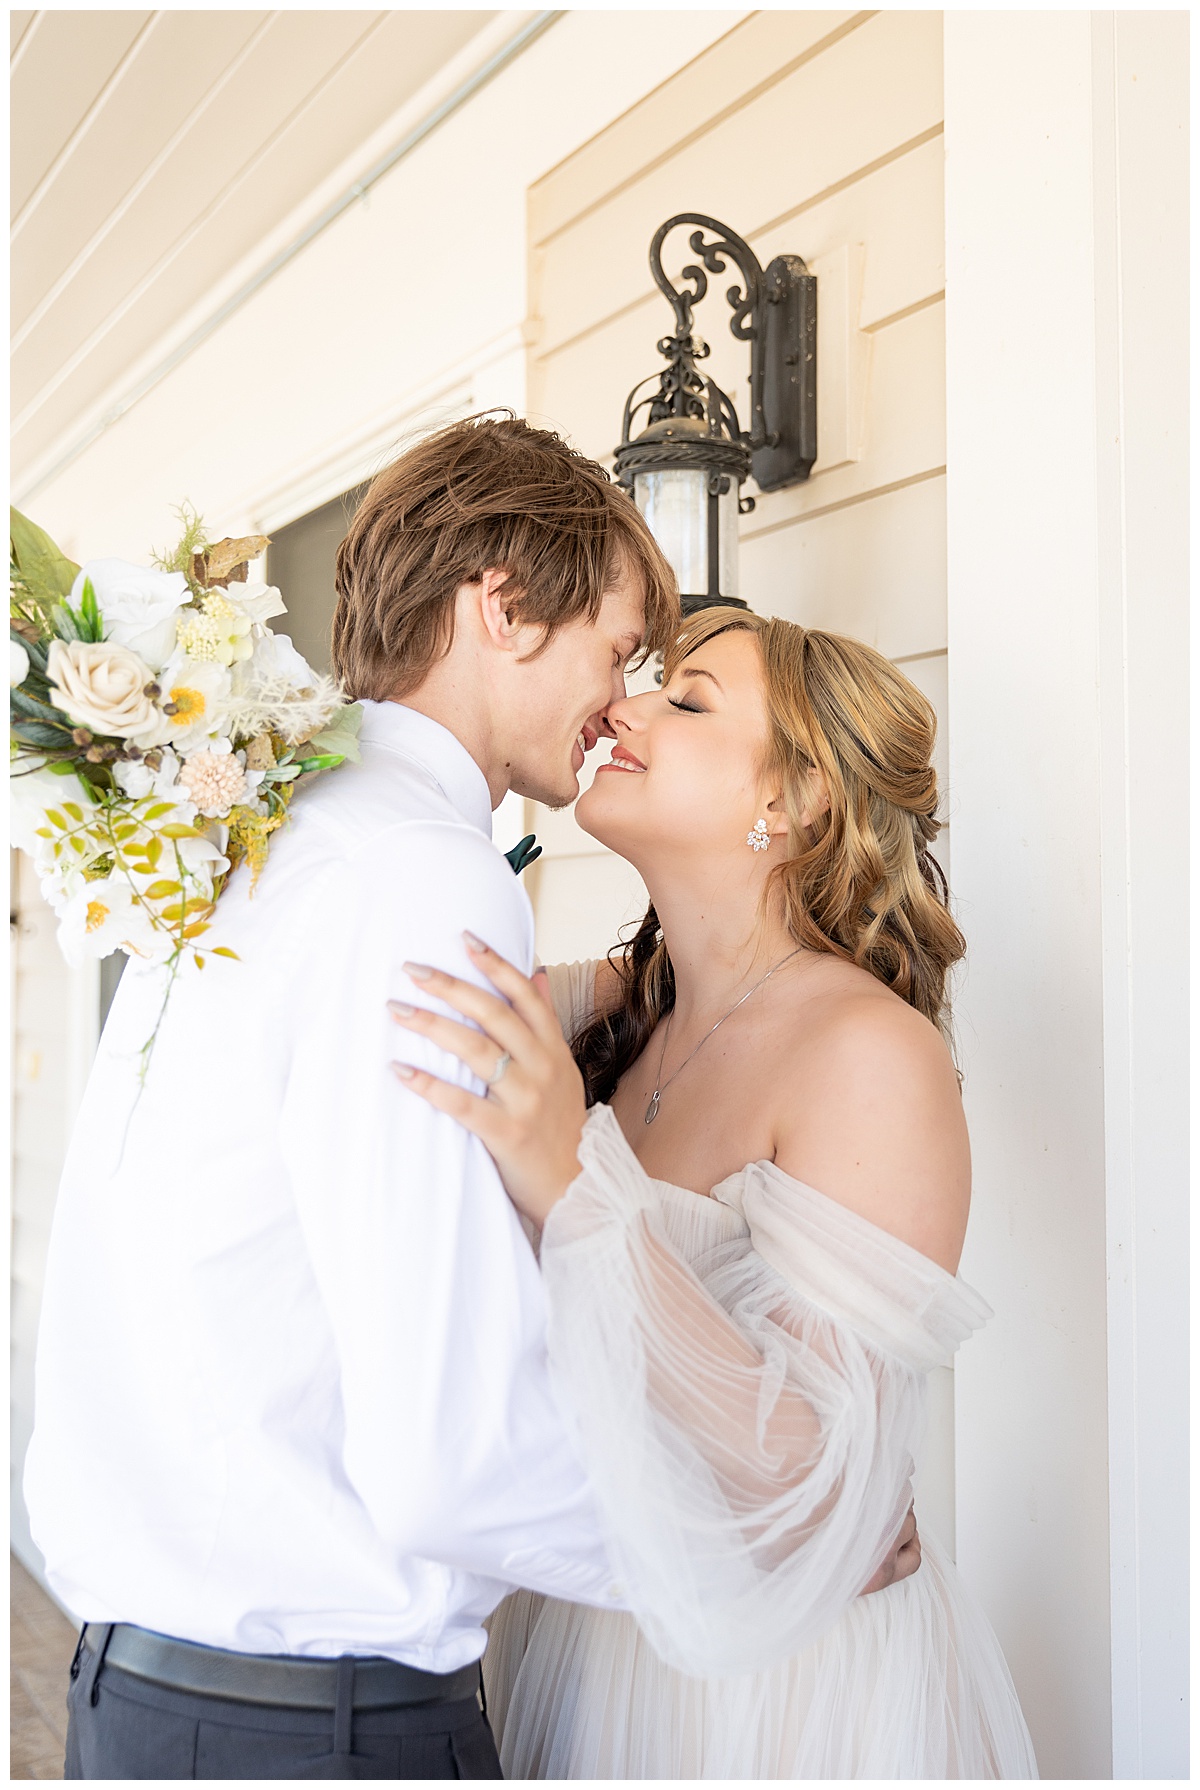 A bride and groom kiss and smile at each other outside on the porch of the mansion.